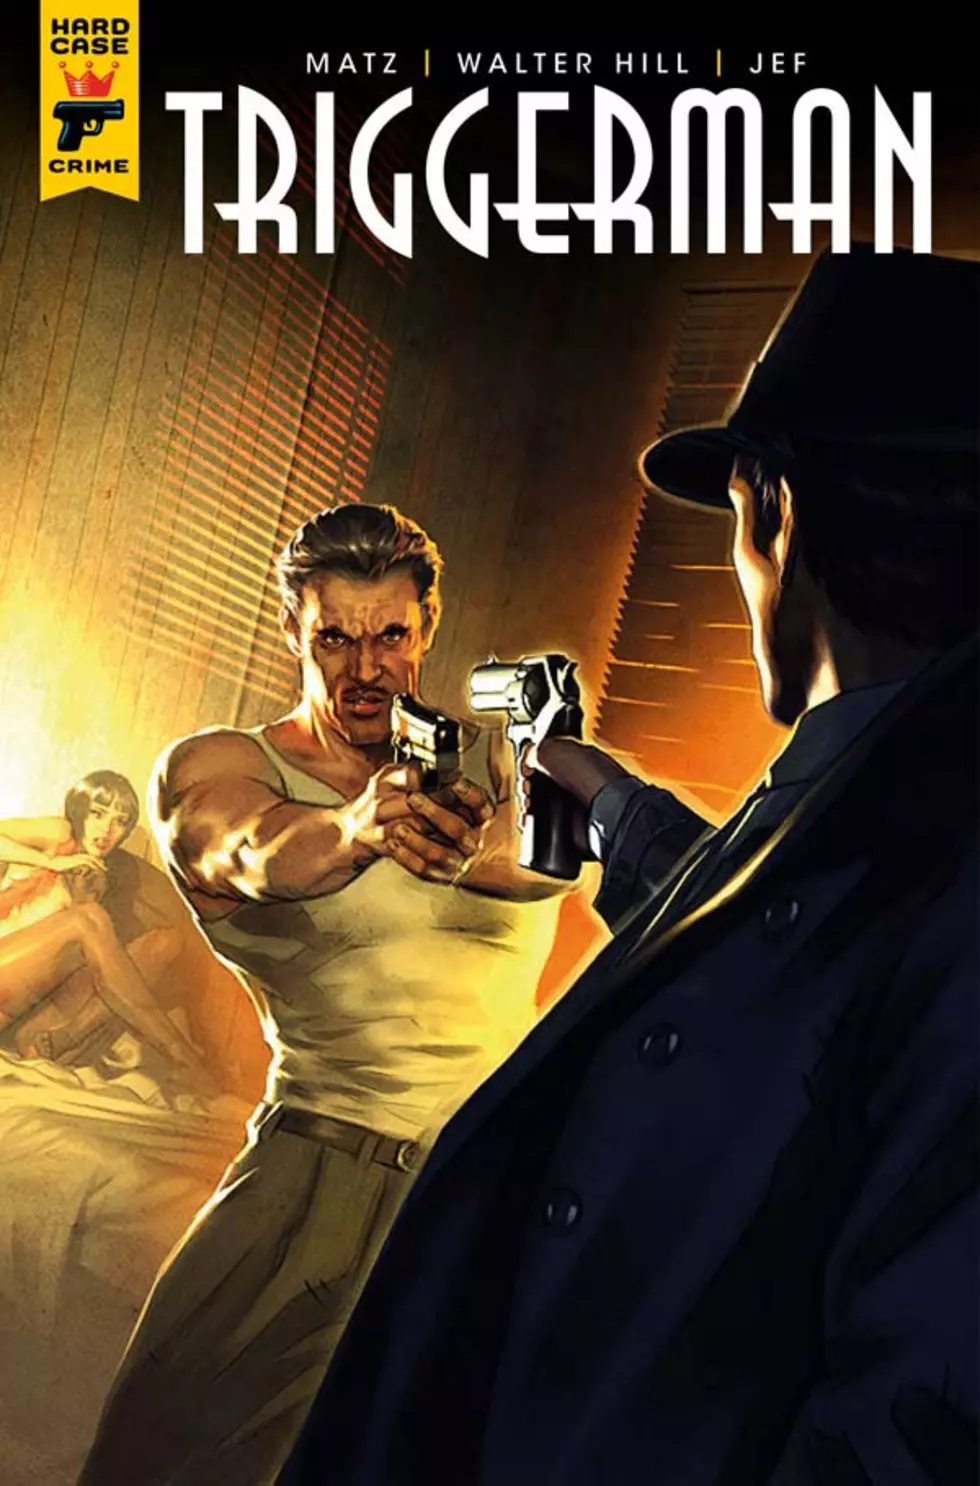 The Art of Noir: Hard Case Unveils Covers for &#8216;Triggerman&#8217; and &#8216;Peepland&#8217; #2